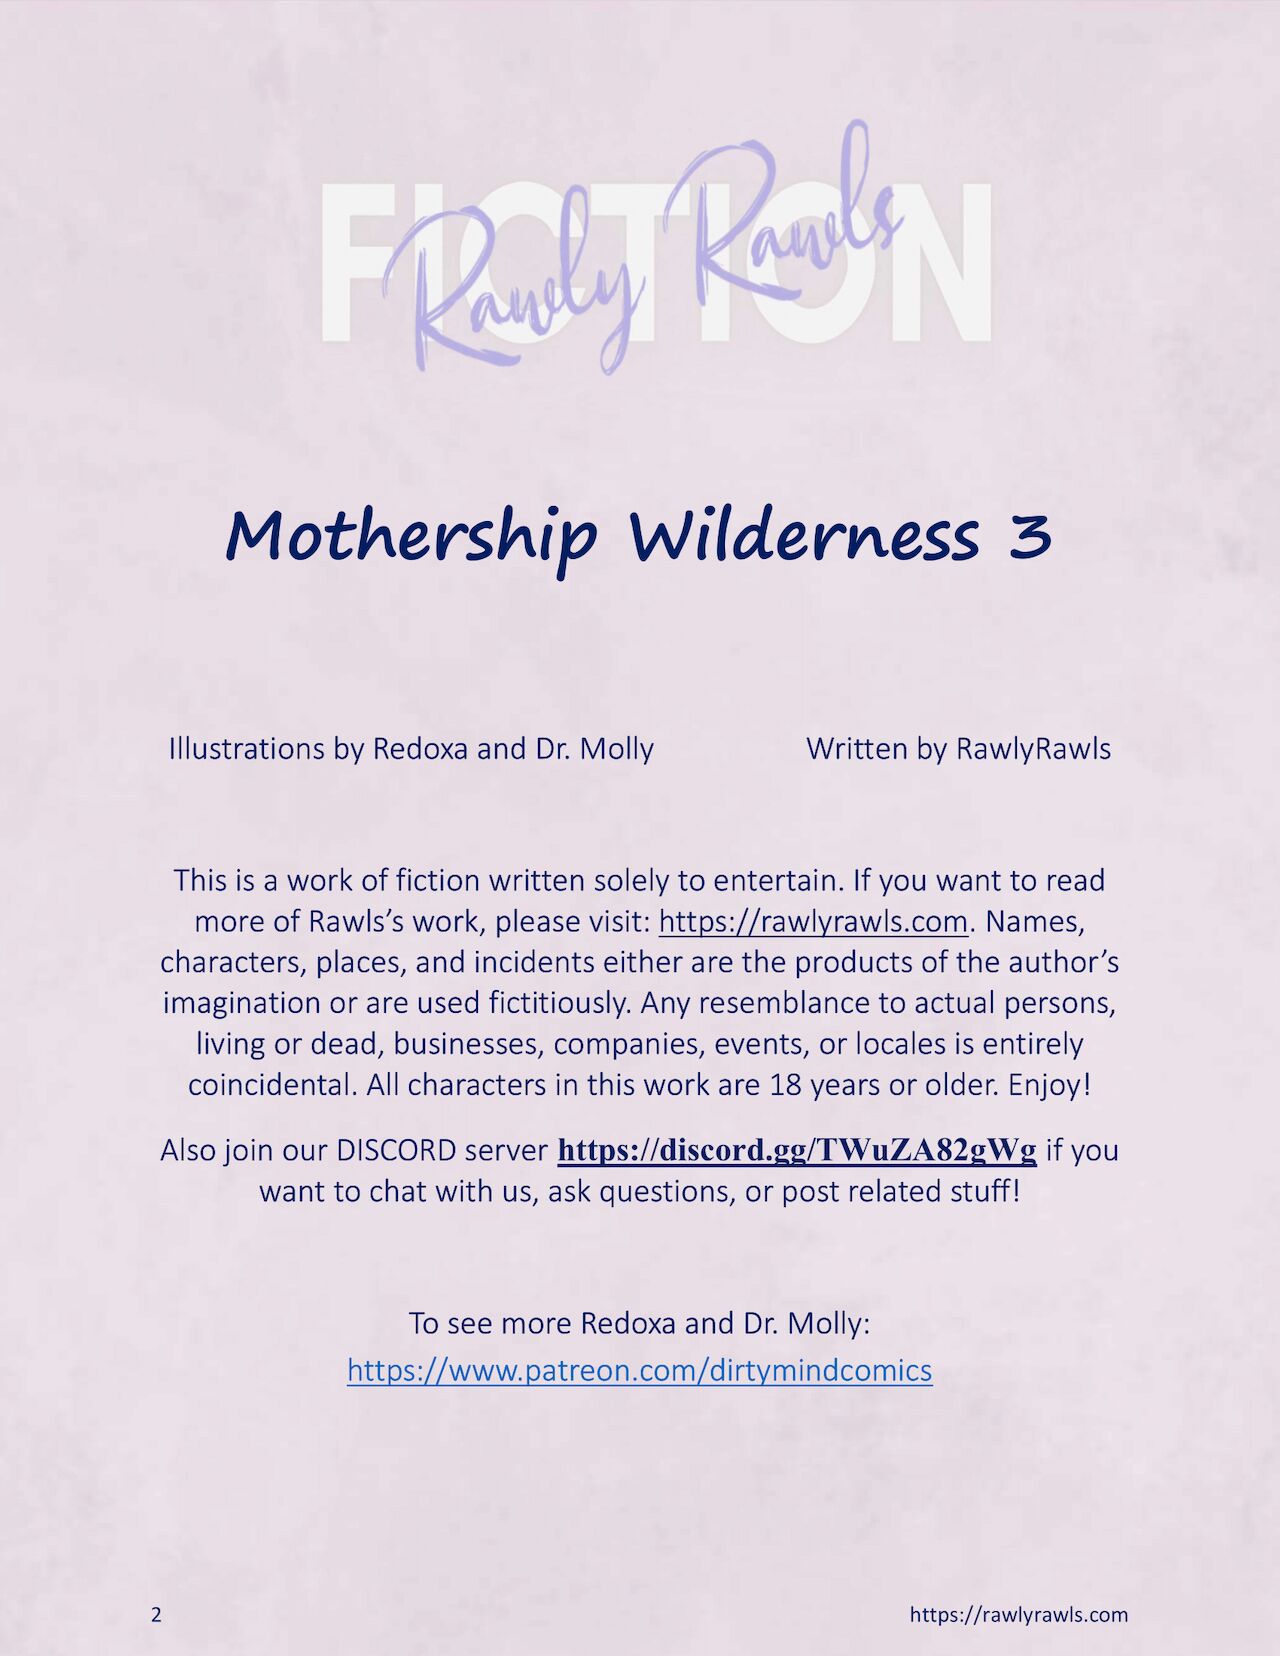 Mothership Wilderness Chapter 3: Rawly Rawls Fiction 2